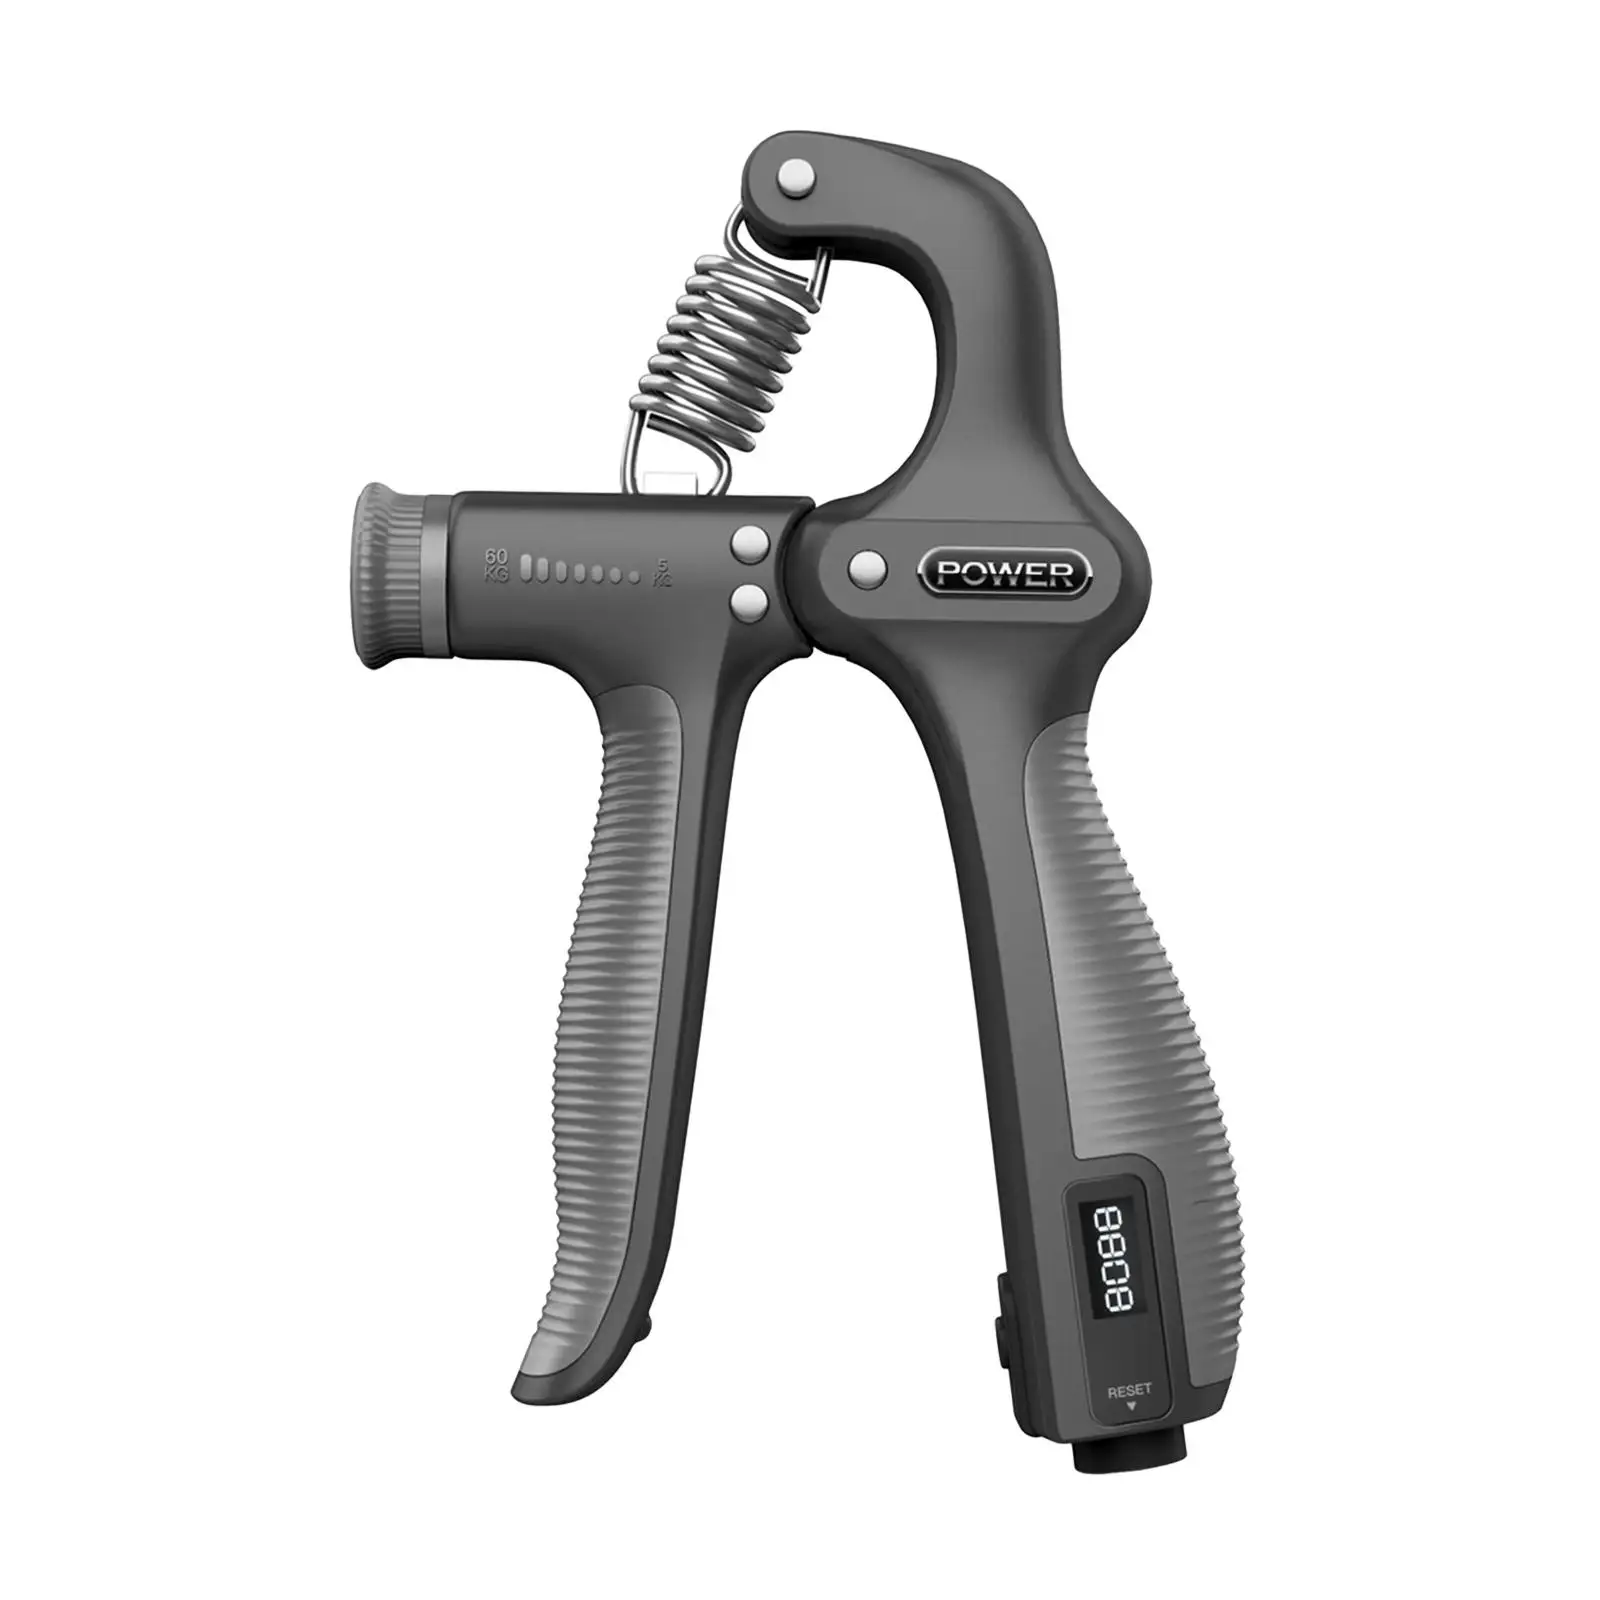 Hand Grip Strengthener Professionals Workout Non Slip Men Women with Counter